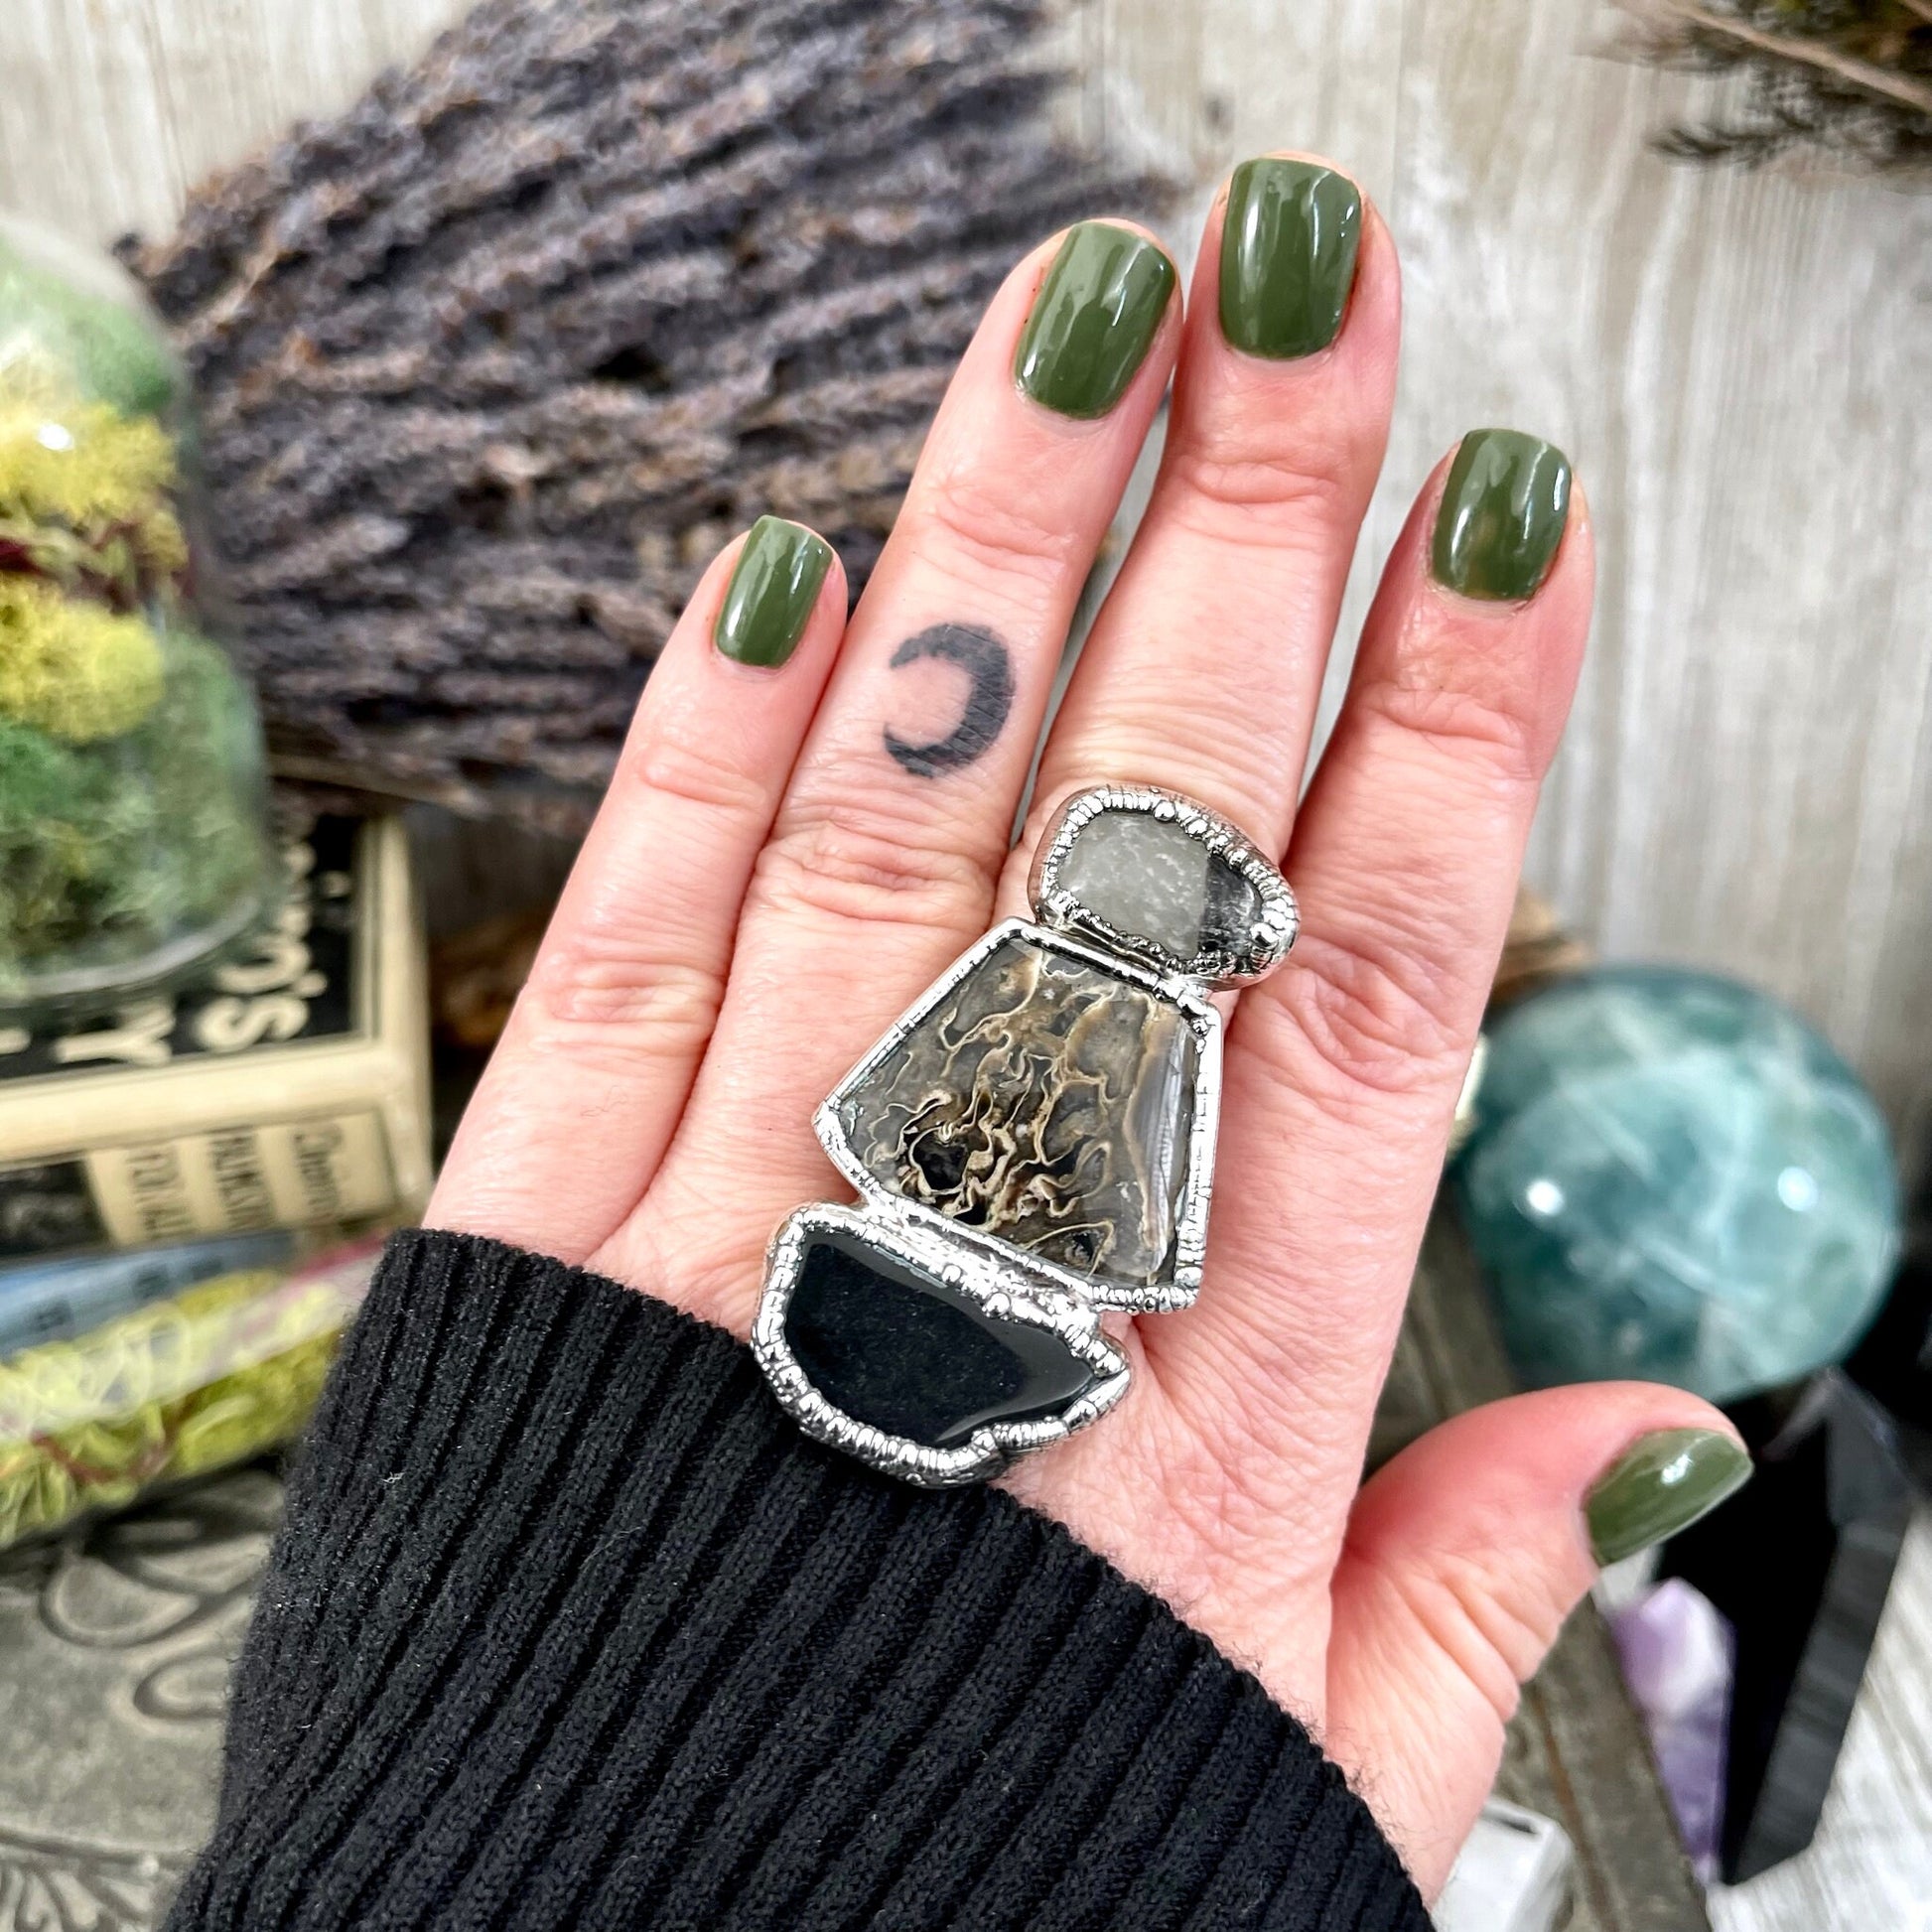 Size 10.5 Three Stone Ring- Palm Root Black Onyx Tourmaline Quartz Crystal Ring Fine Silver / Foxlark Collection - One of a Kind / Jewelry